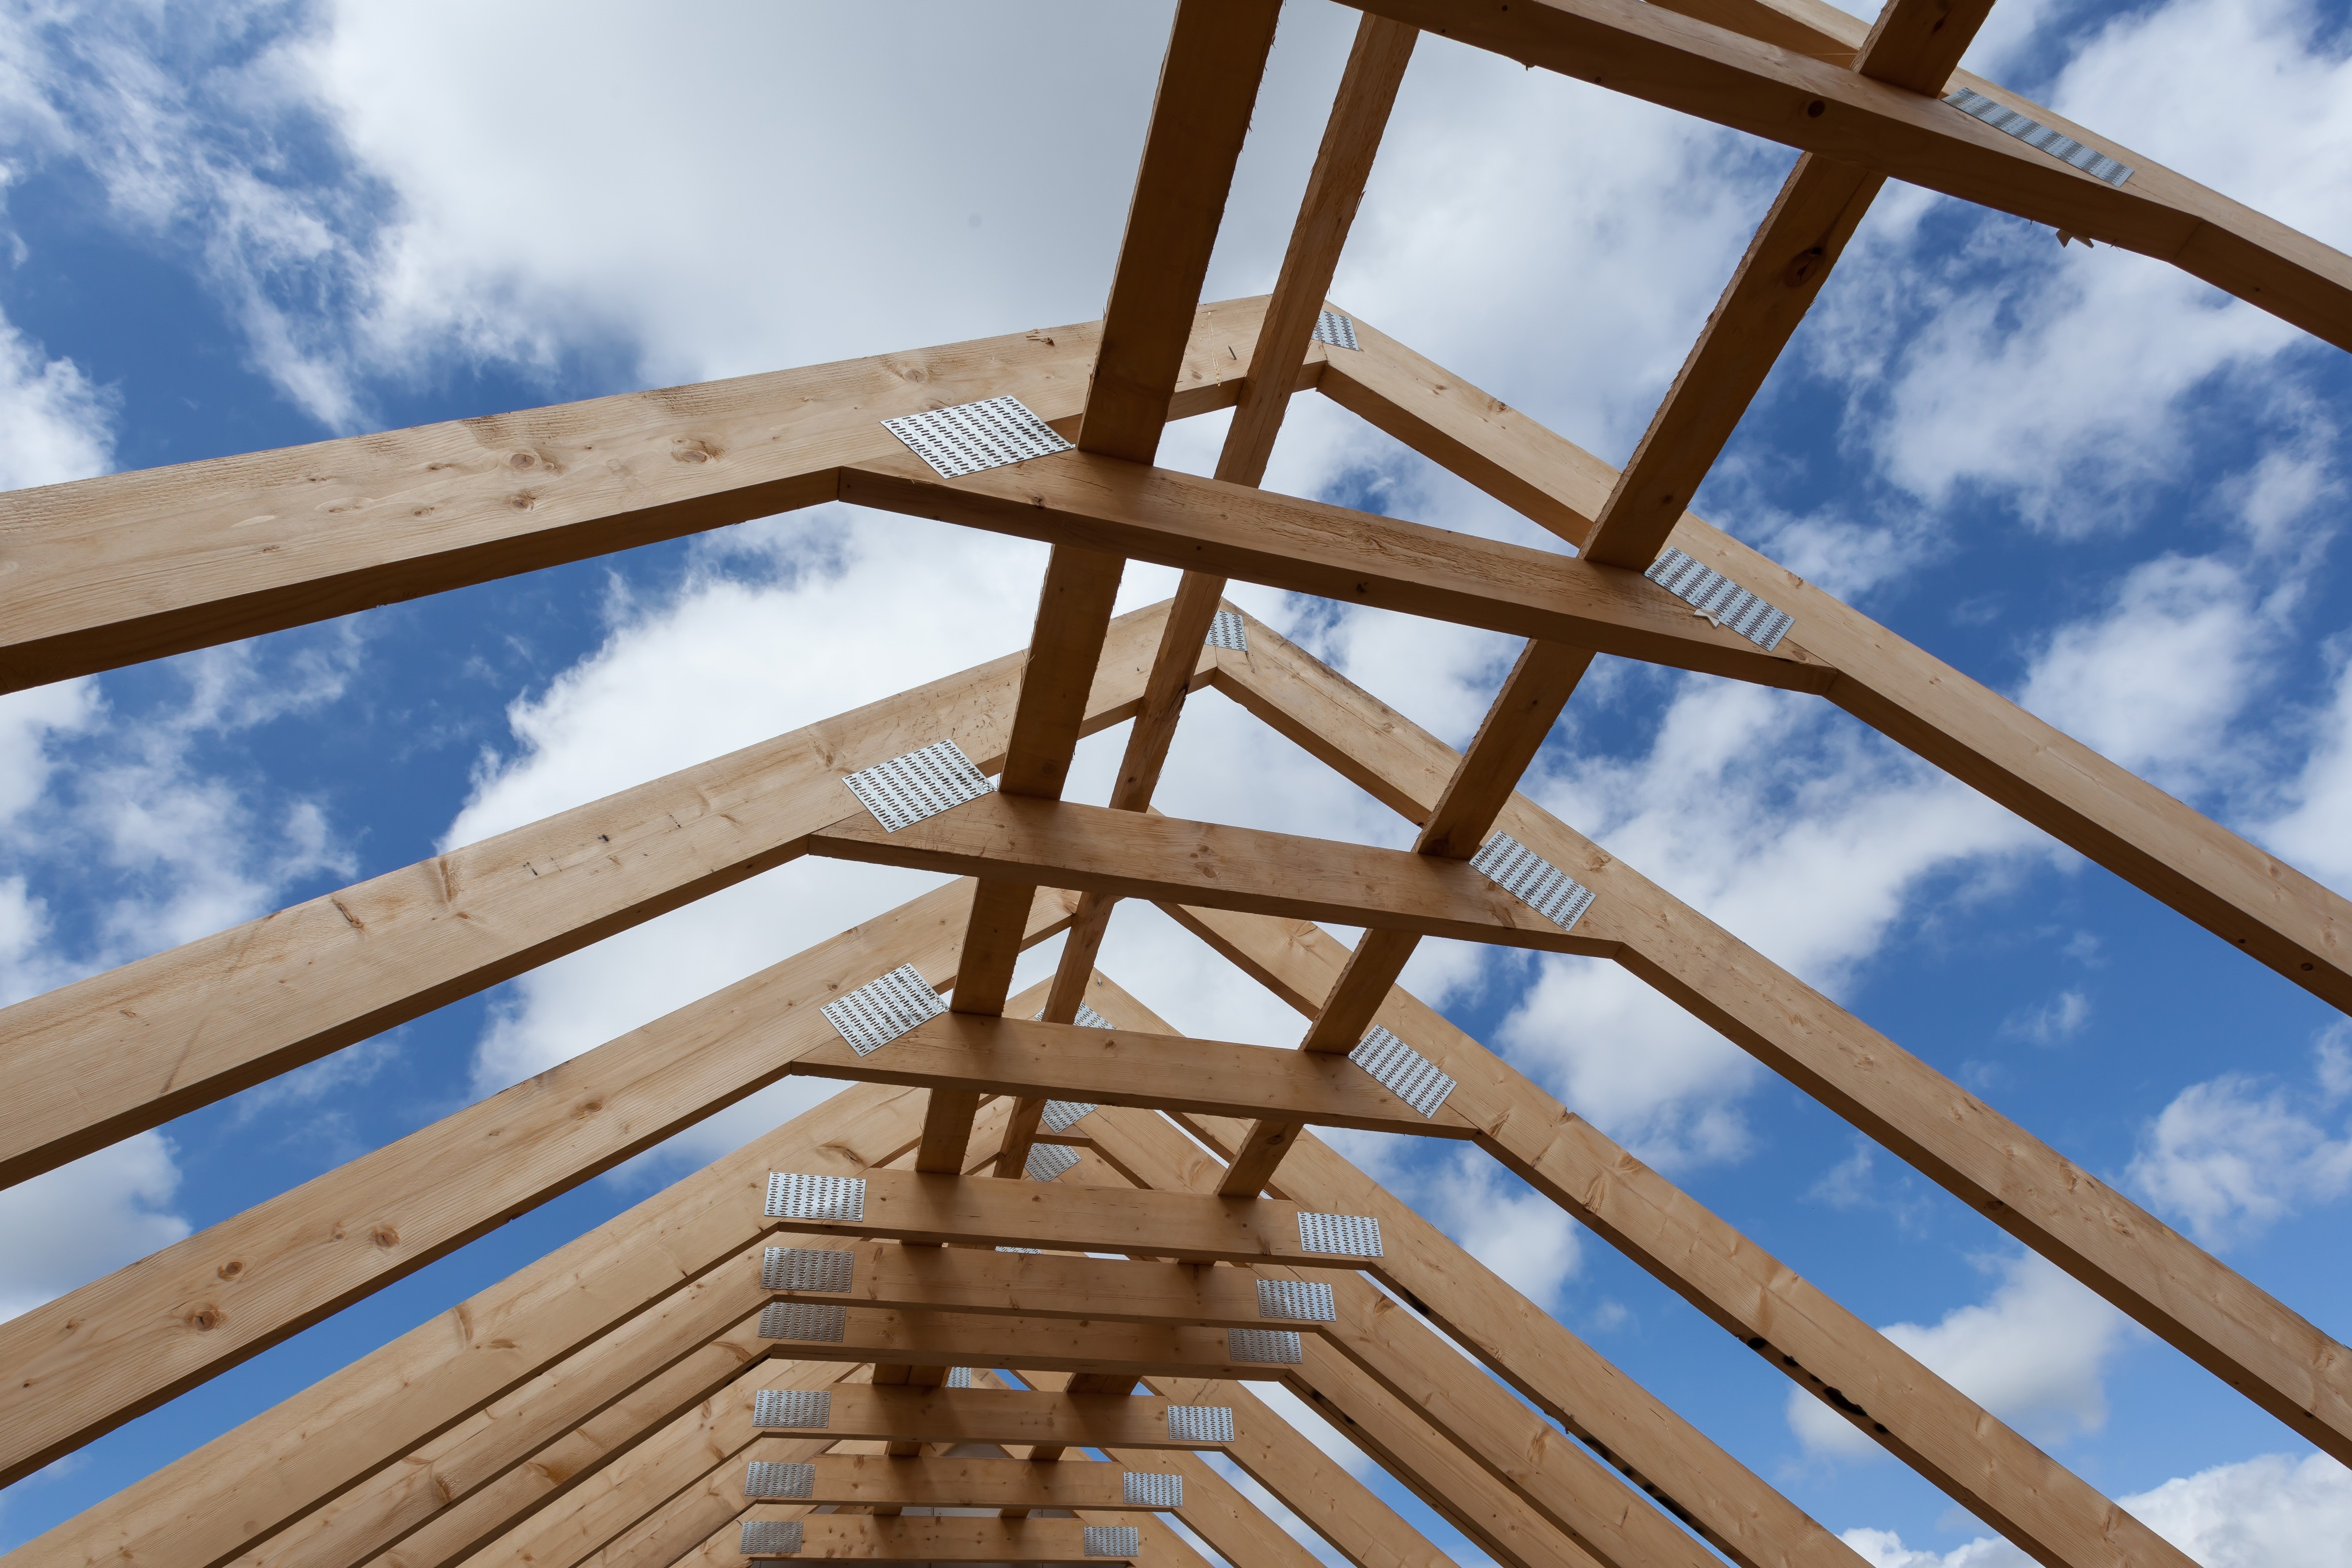 Housebuilders urged to review roof designs